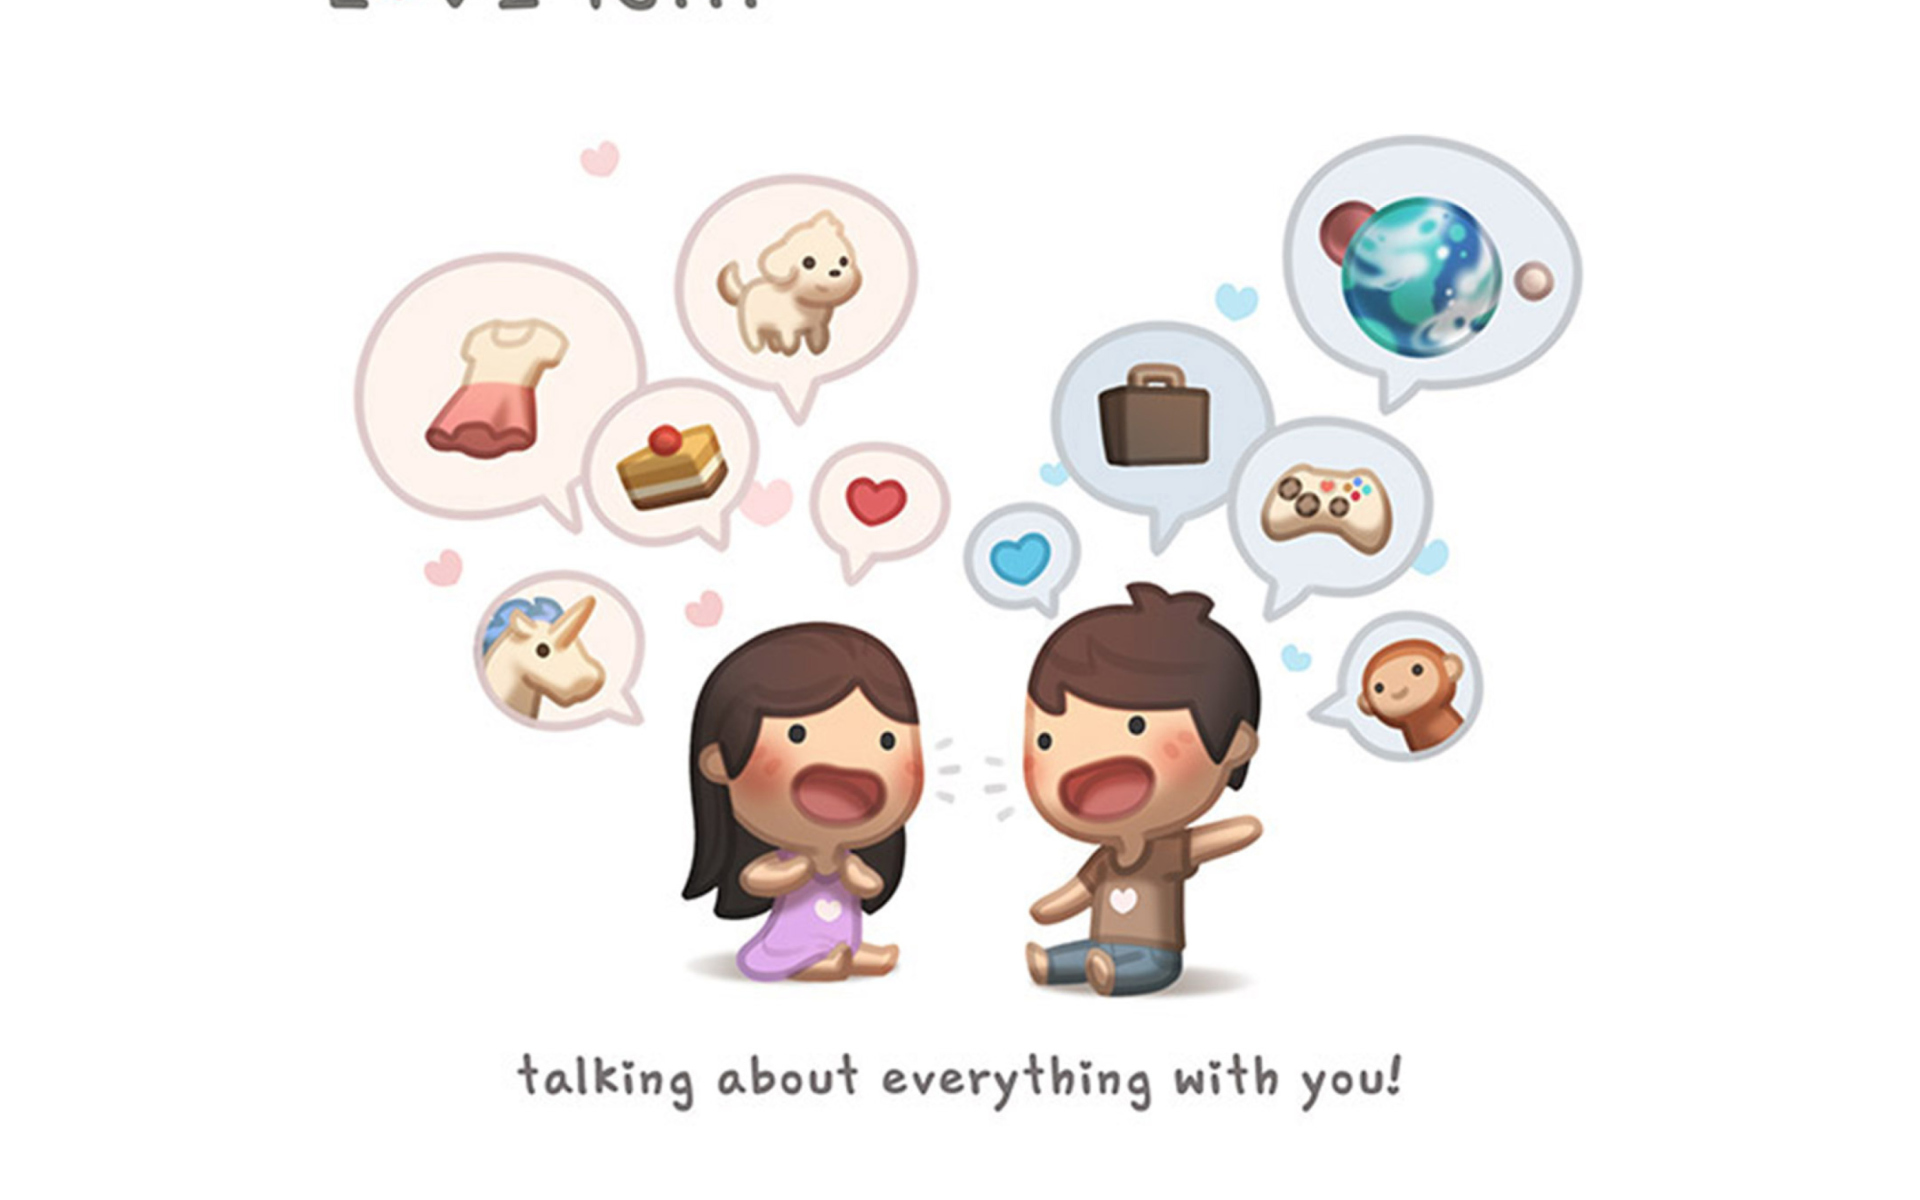 Love Is - Talking About Everything With You wallpaper 1920x1200